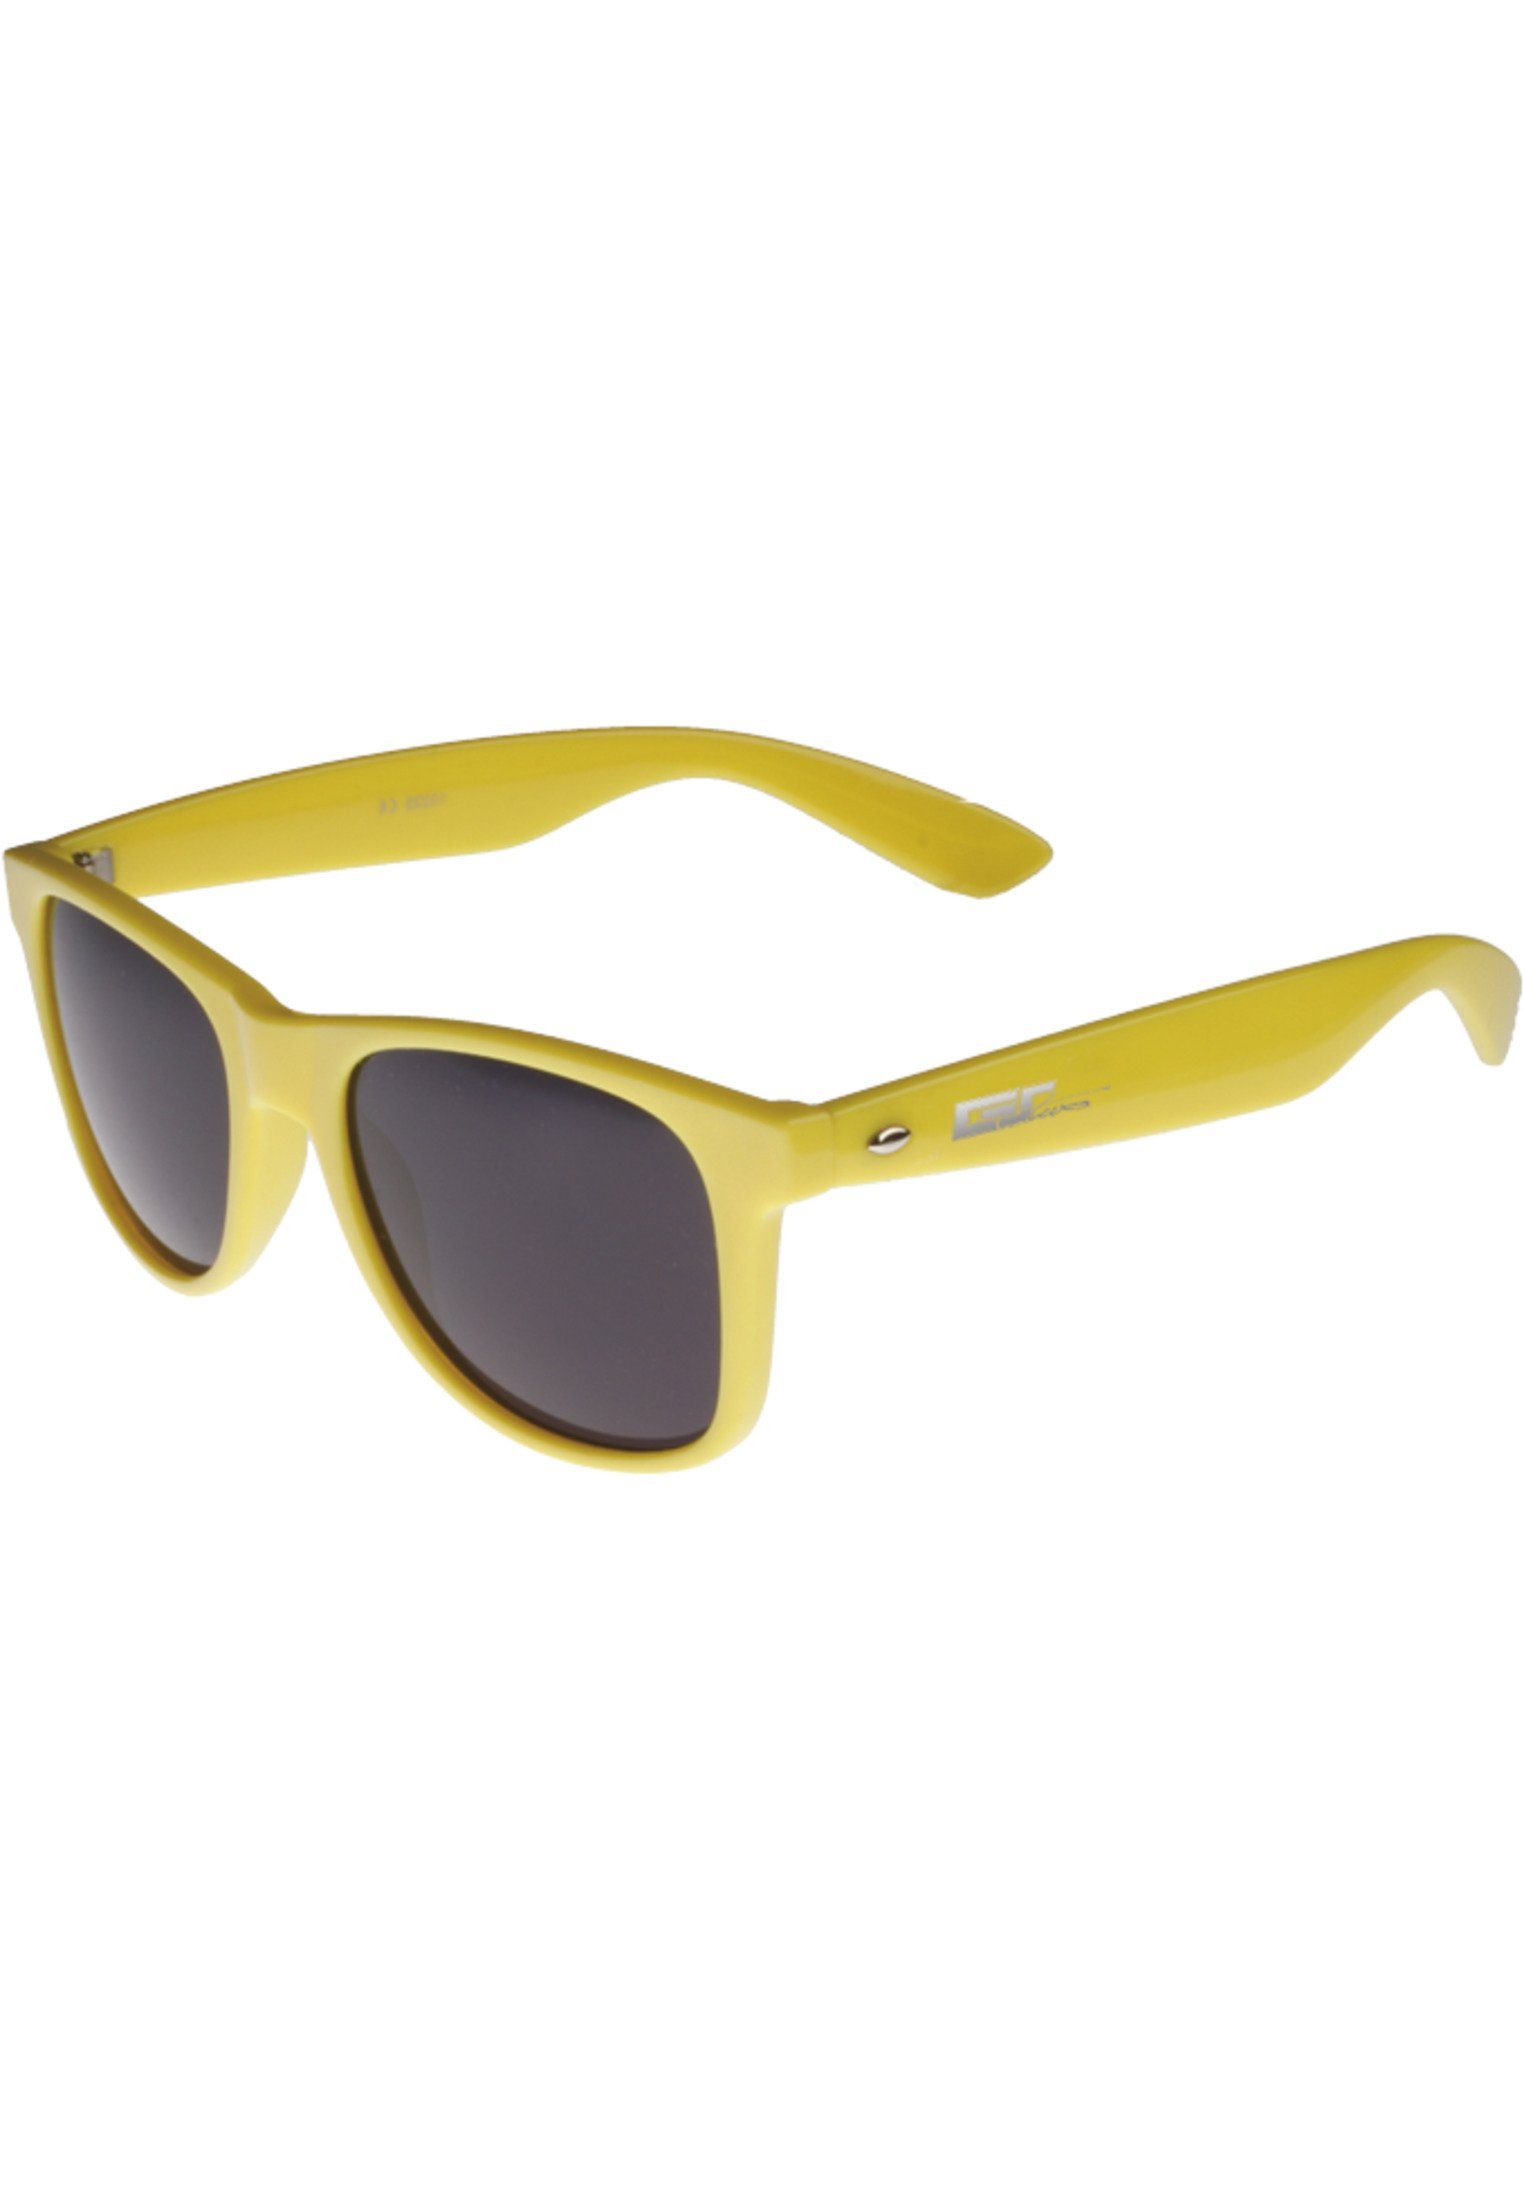 MSTRDS Sonnenbrille Accessoires Groove Shades GStwo yellow